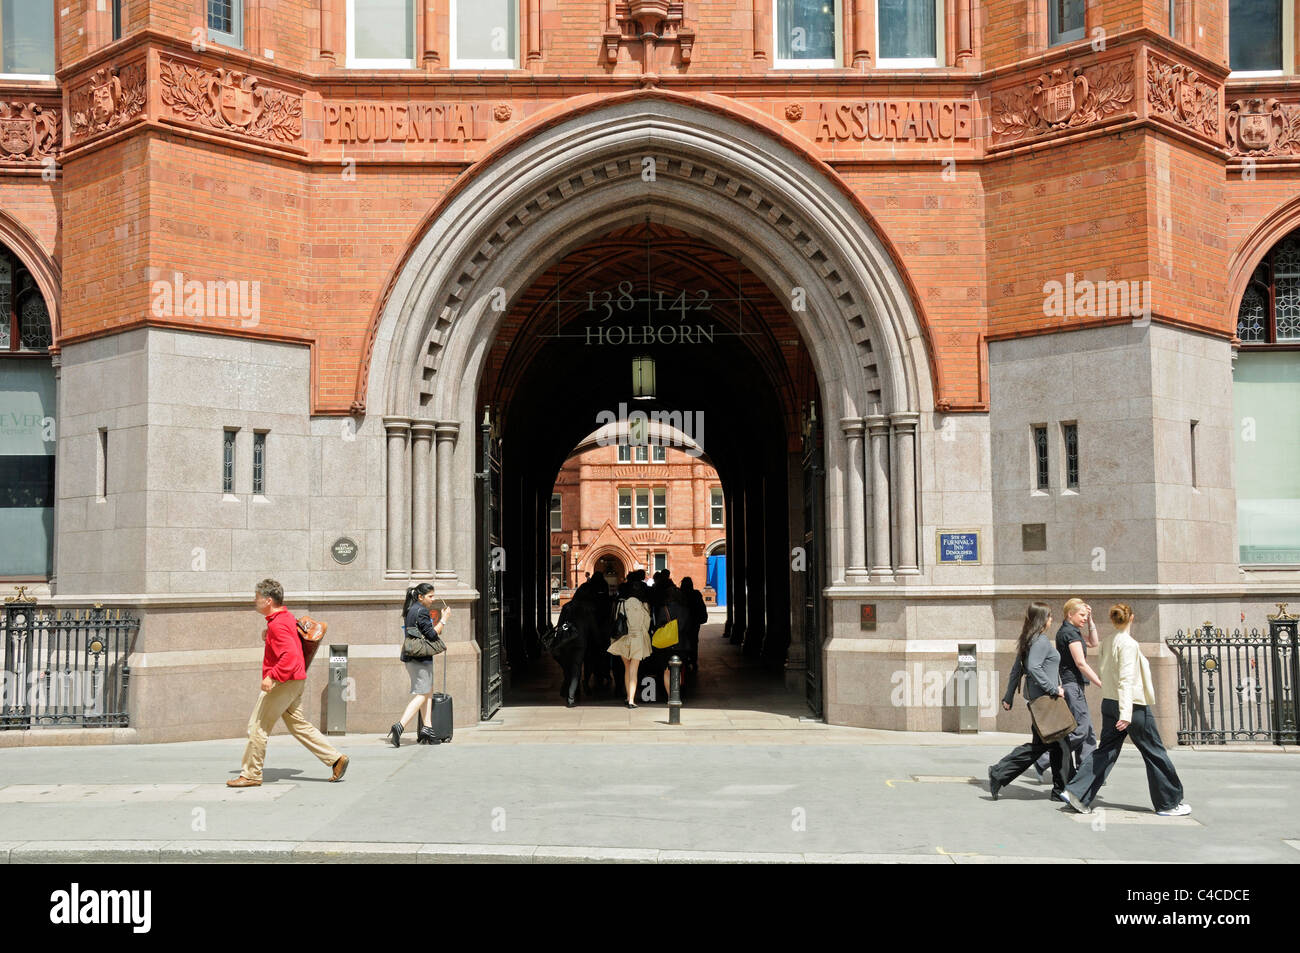 People passing the entrance to The old Prudential Assurance Building in High Holborn London England UK Stock Photo